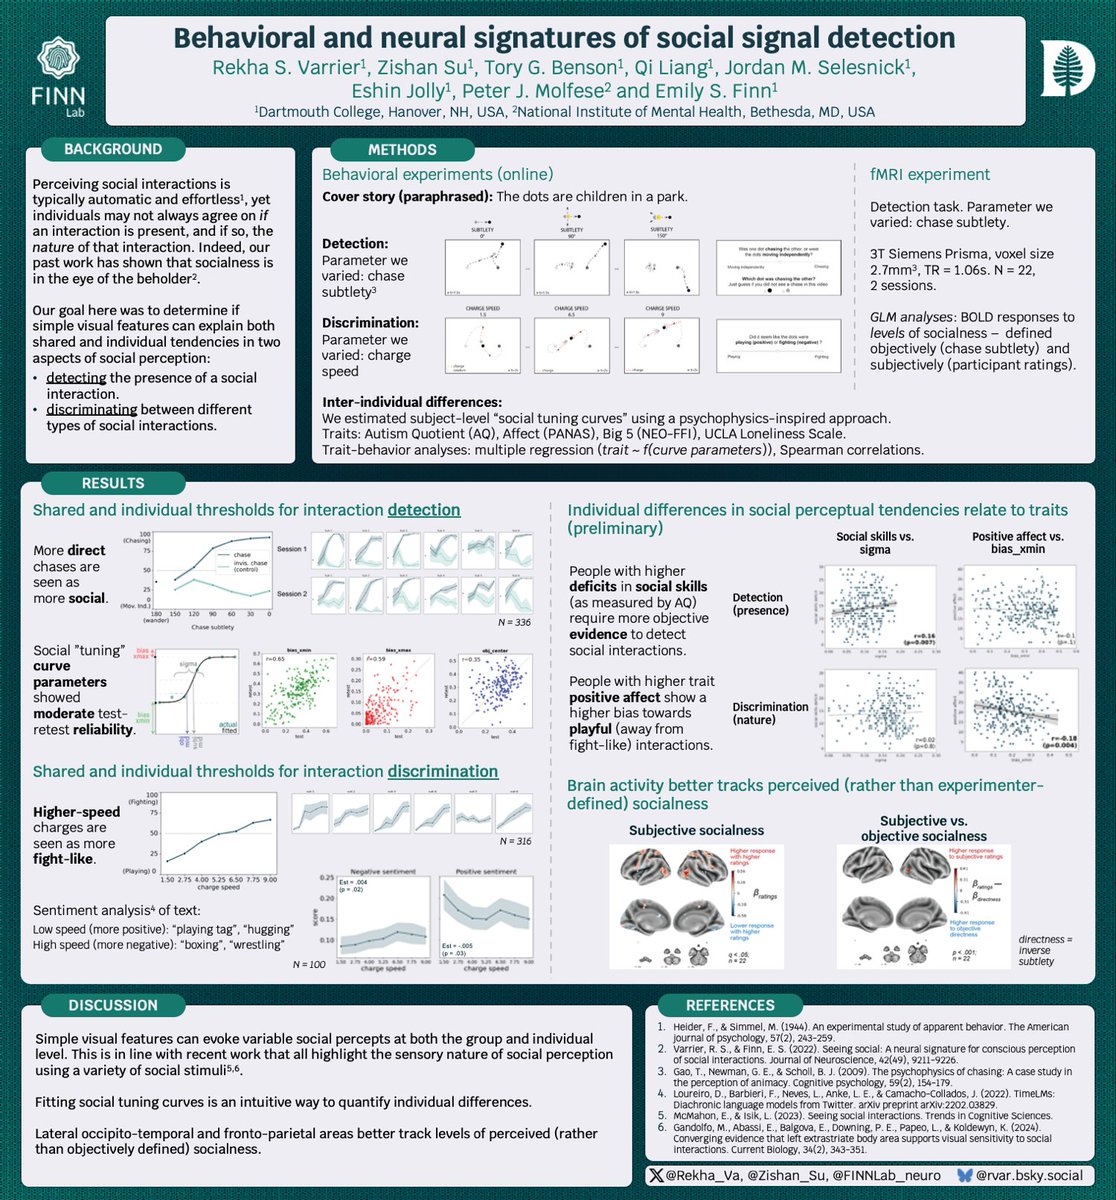 Today at #SANS2024. I'll be presenting our work that looks at the shared and individual processes involved when people interpret Heider and Simmel-esque social interaction animations! Poster# P3-A-1